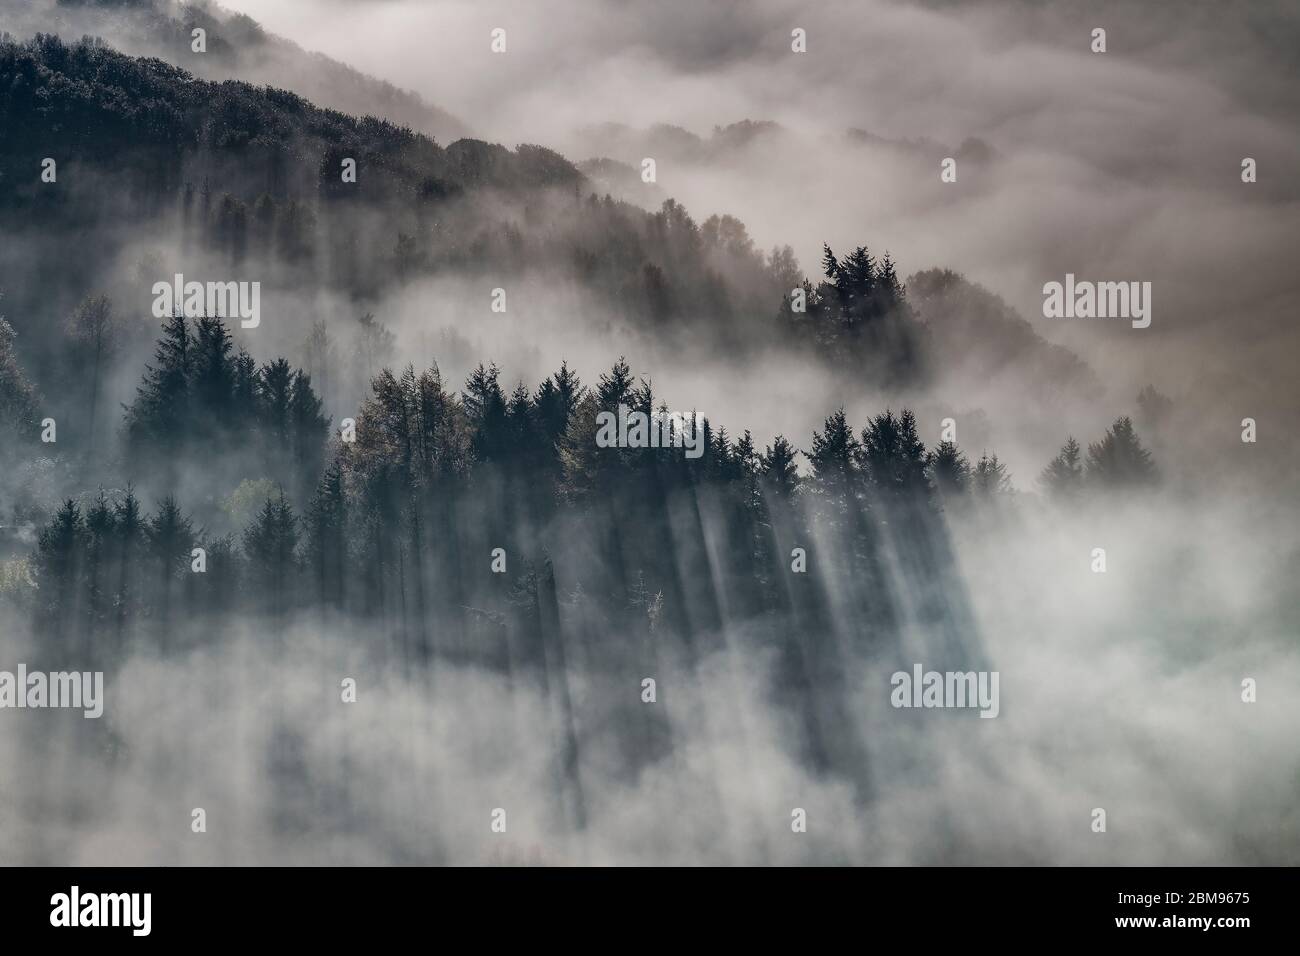 Early Morning Mist and Fog encase Gwydir Forest, near Capel Curig, Snowdonia National Park, North Wales, UK Stock Photo